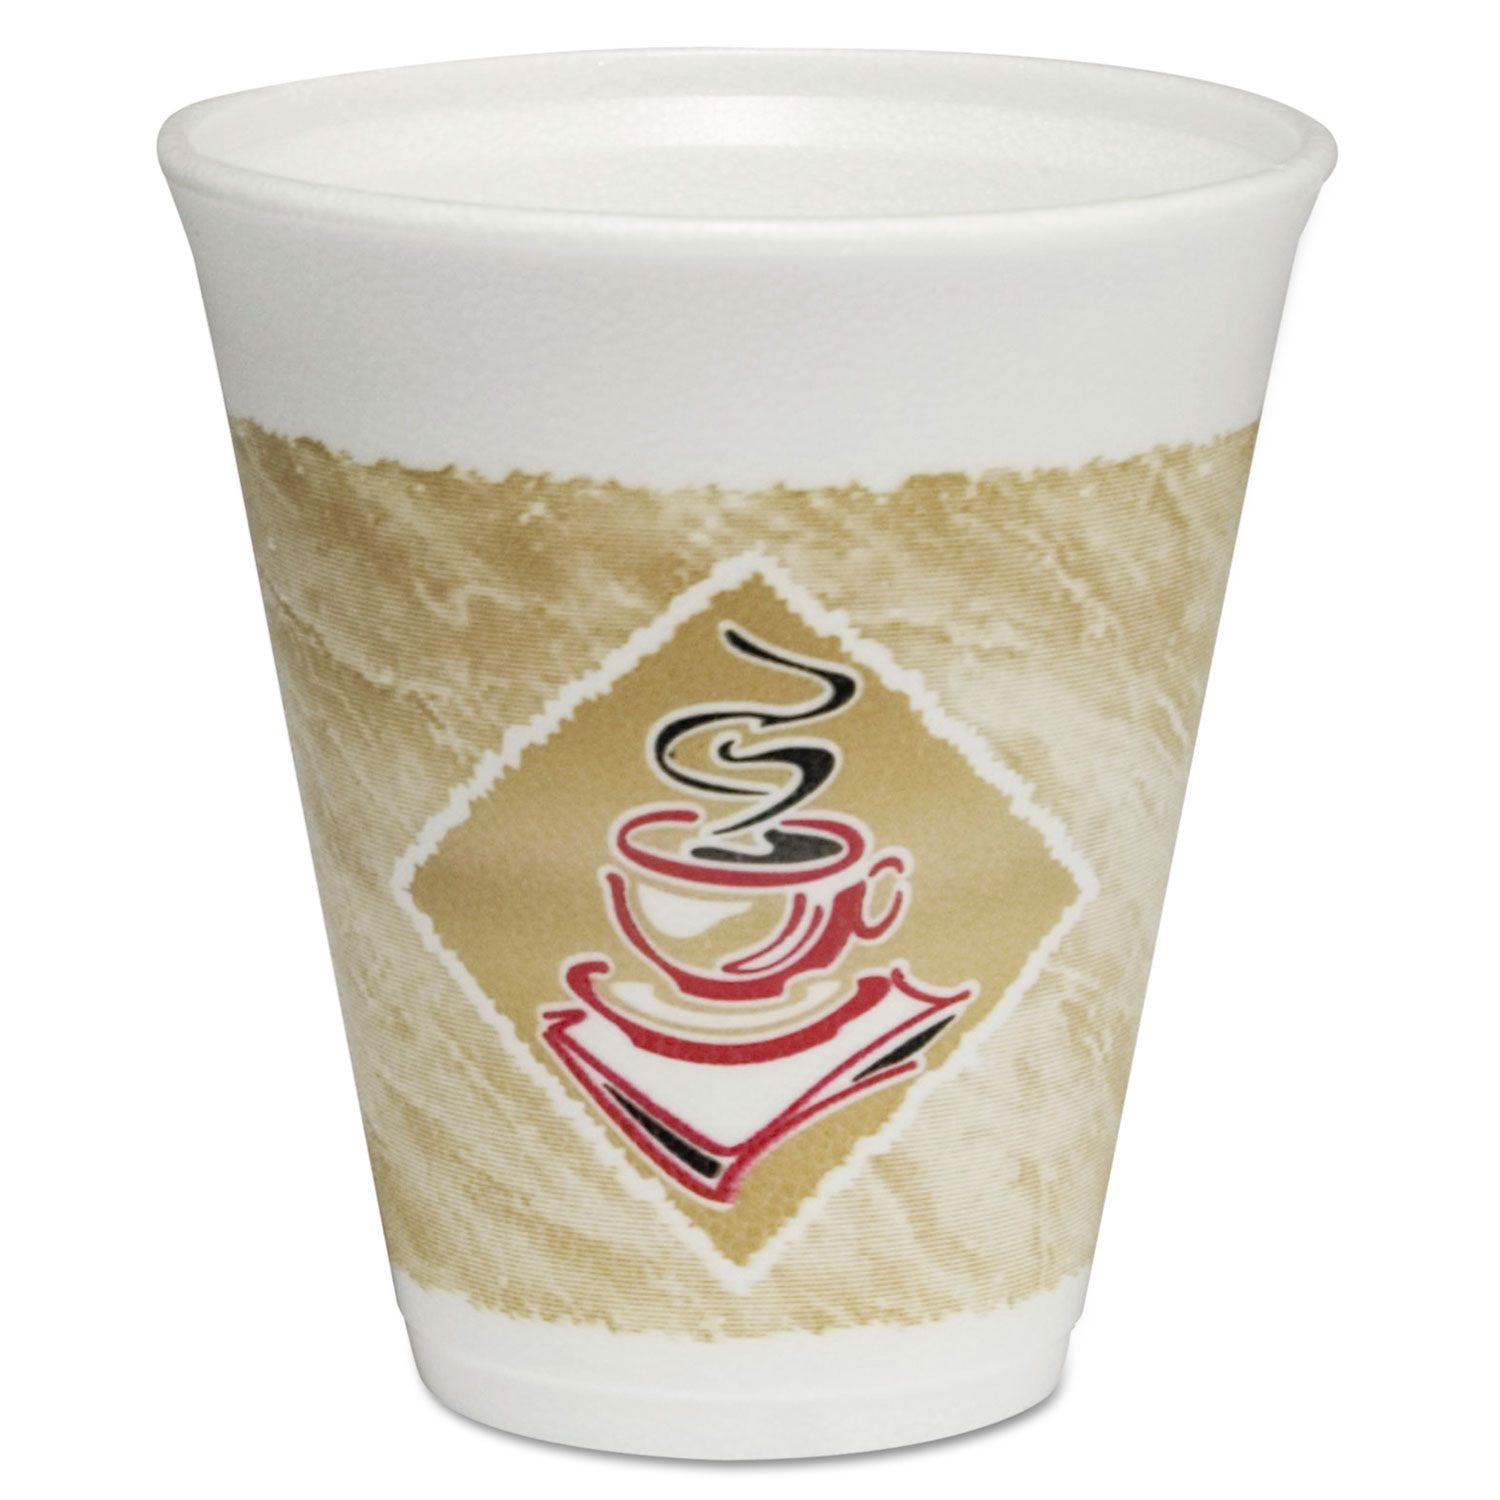 Caf G Foam Hot/Cold Cups, 12oz, White w/Brown & Red, 1000/Carton